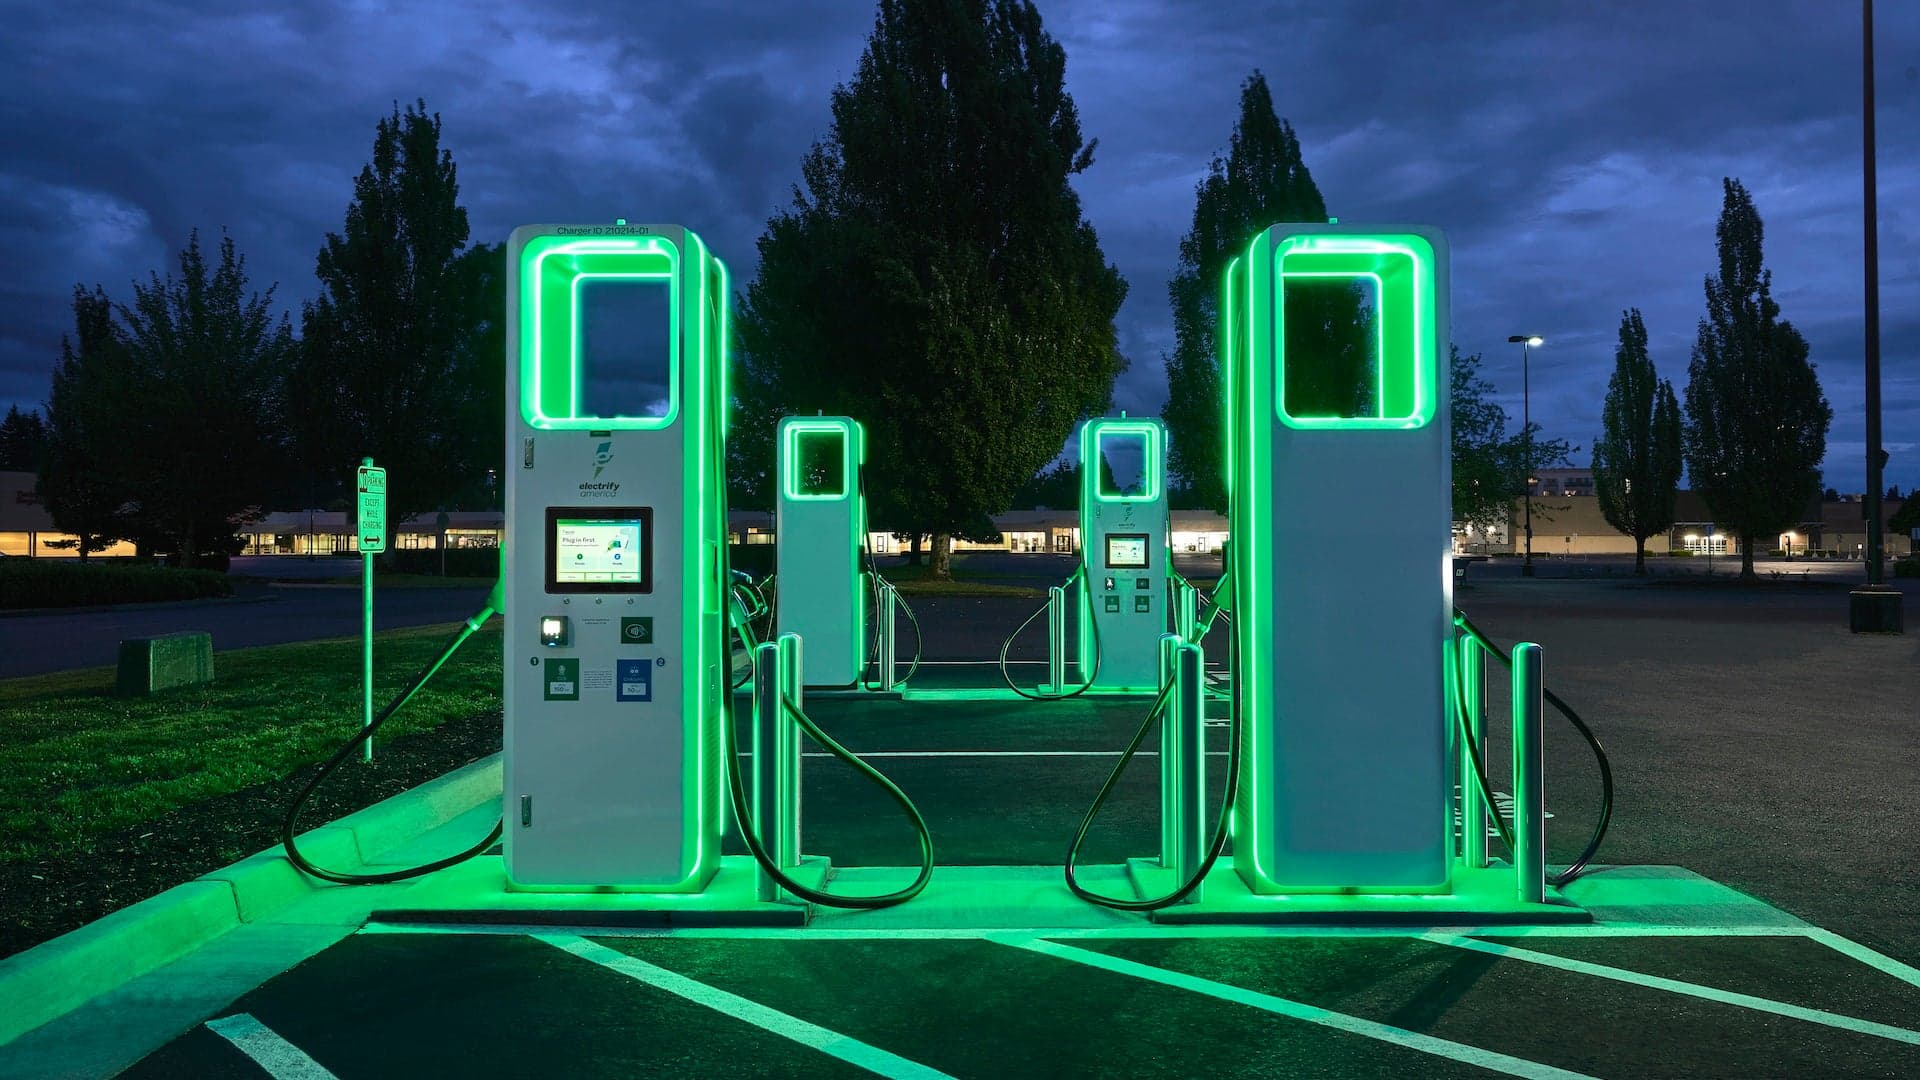 The 3G Shutdown Could Put Some EV Chargers Out of Action